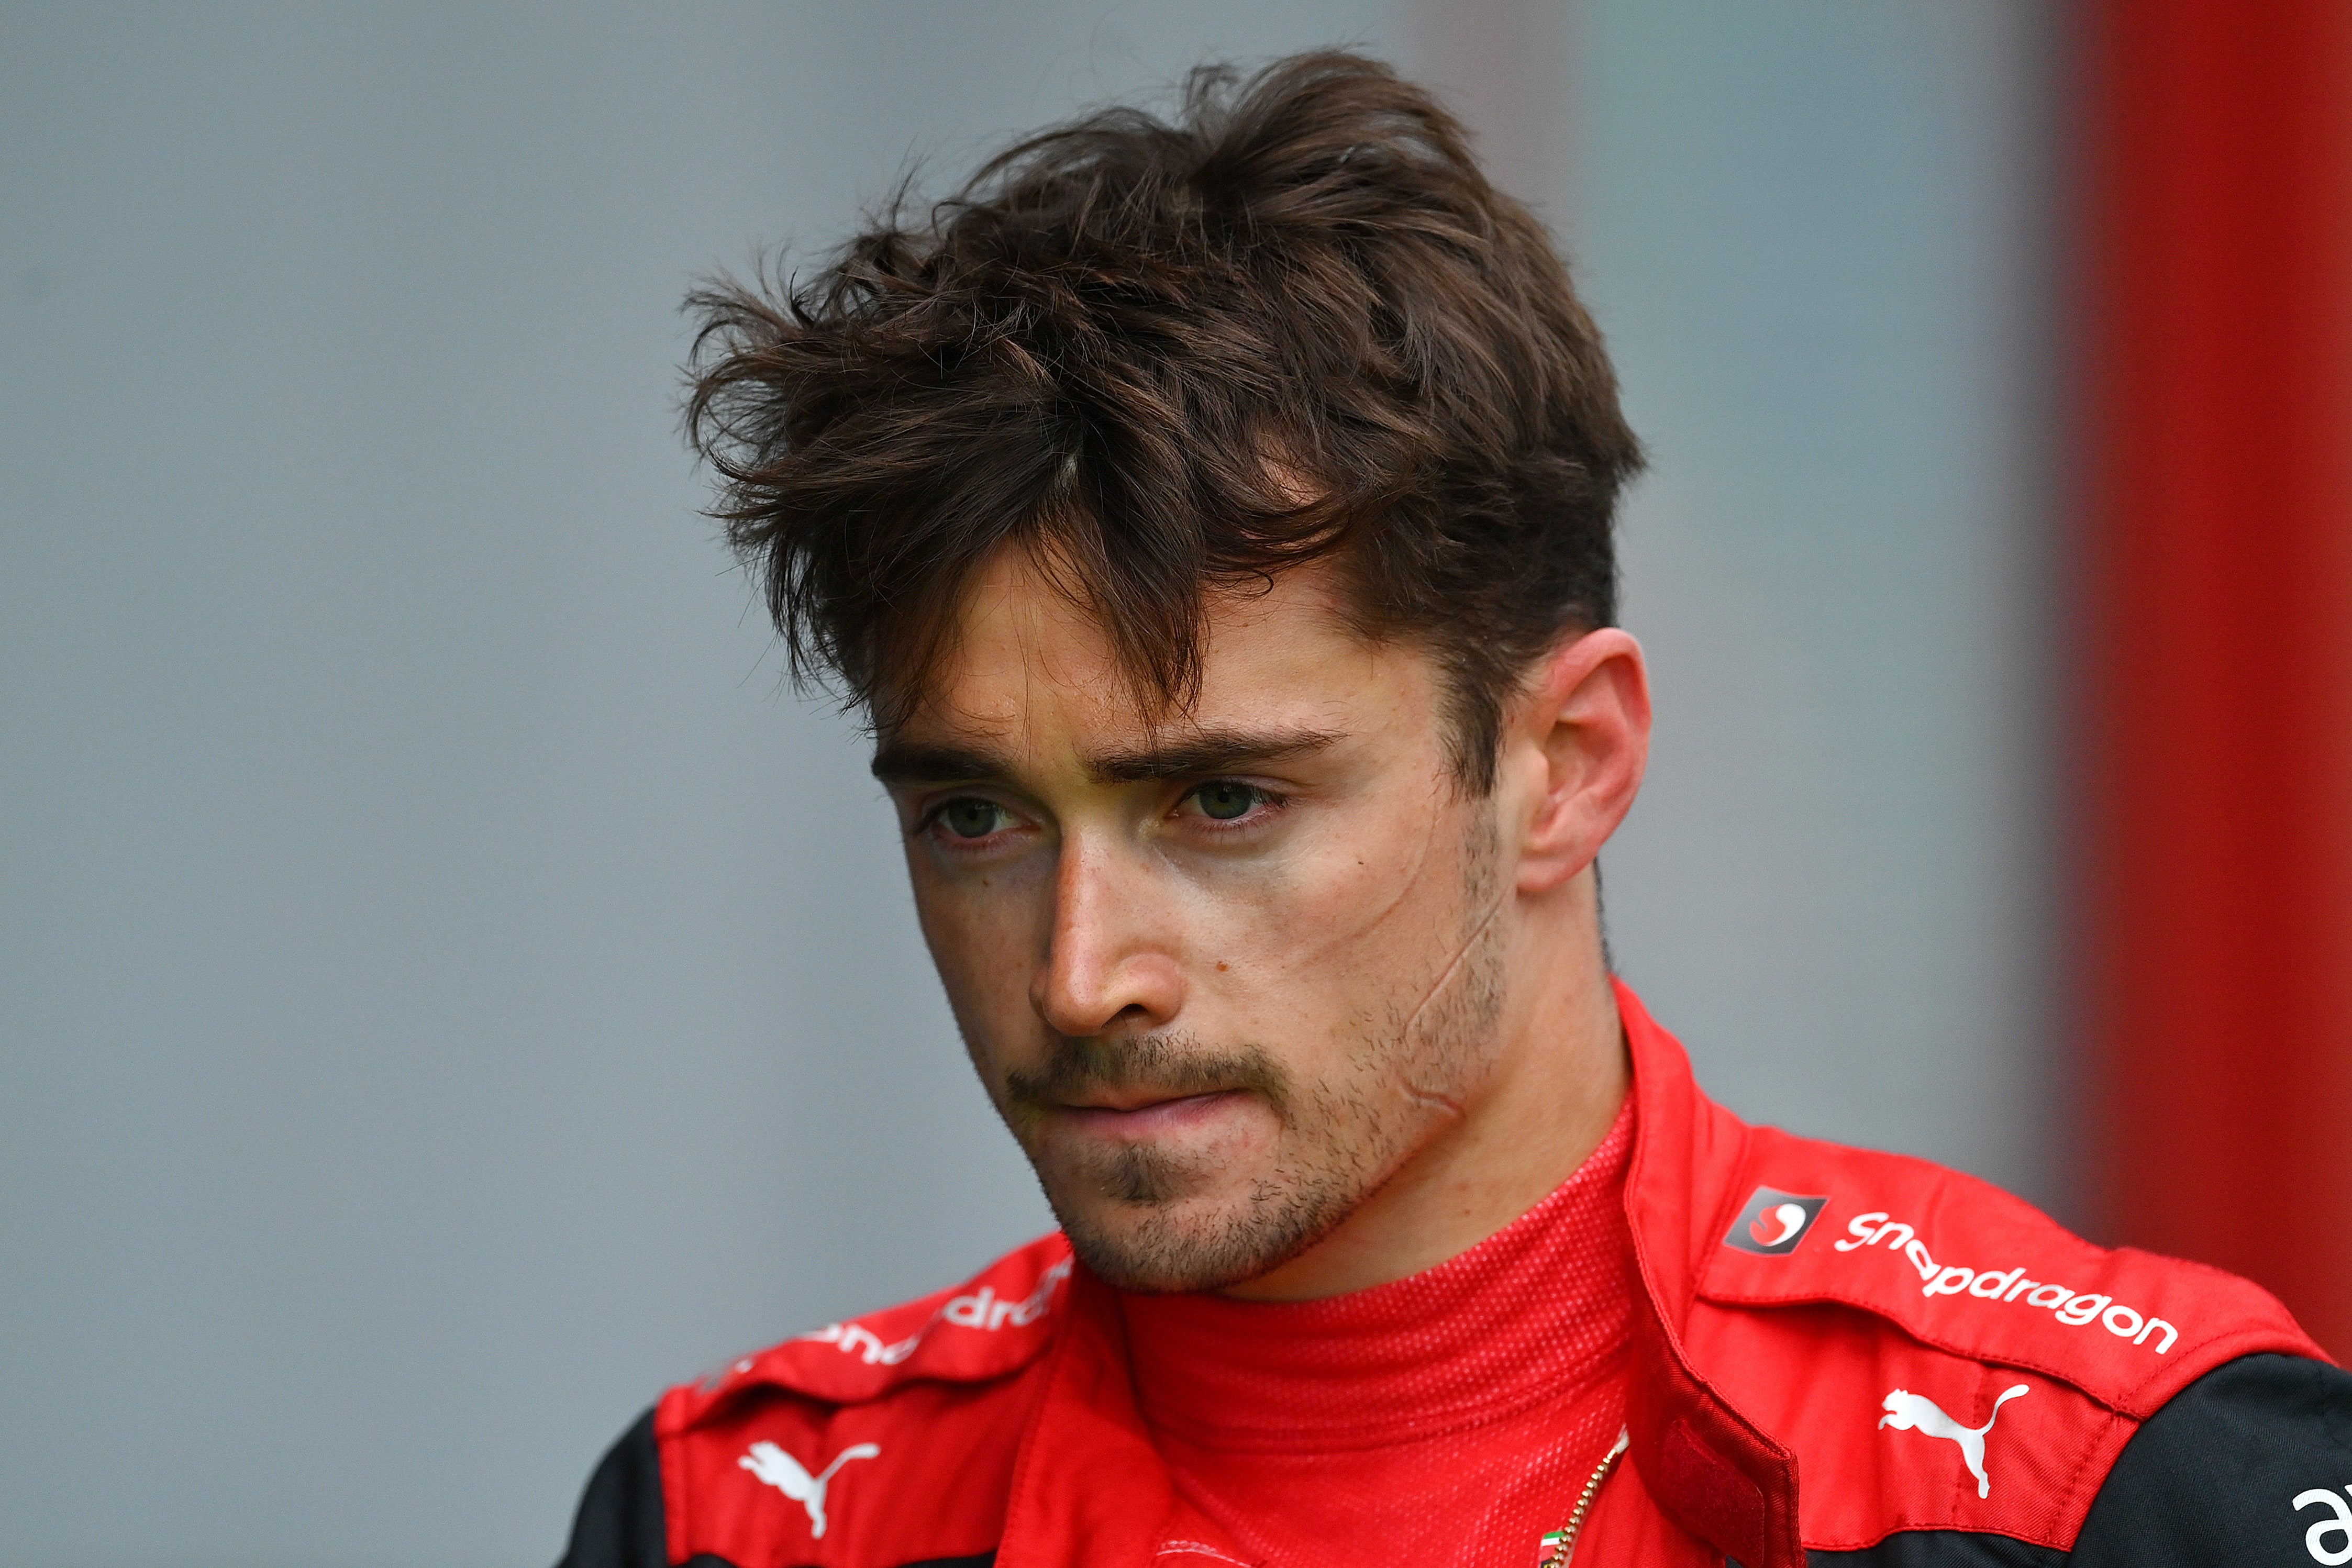 Charles Leclerc had appeared set for a podium finish before spinning off track